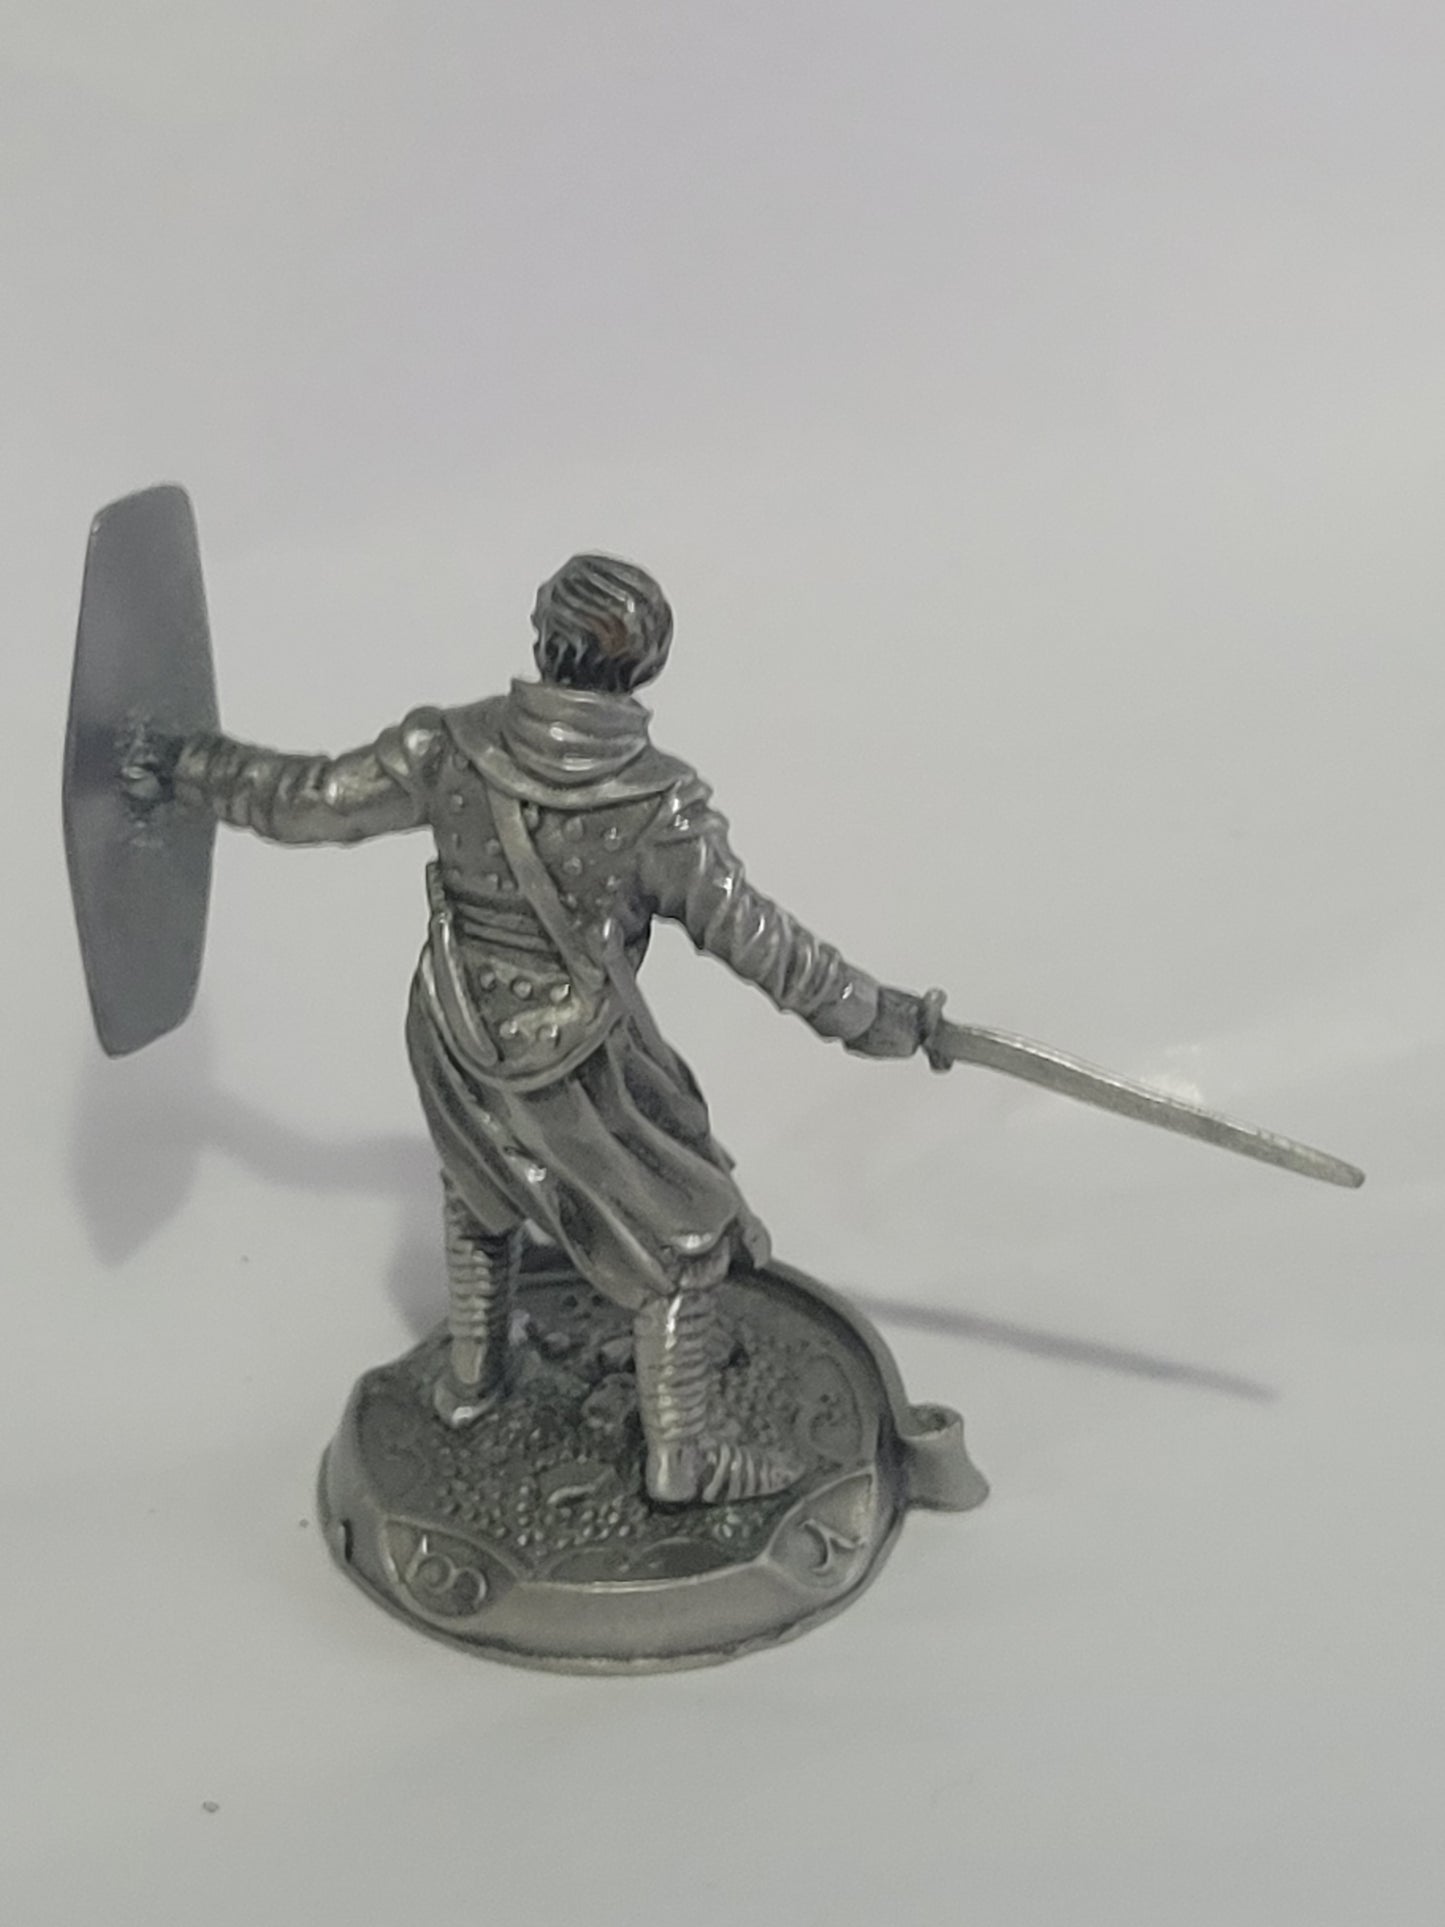 Half-Orc from the Lord of the Rings by Rawcliffe, Pewter Figurine